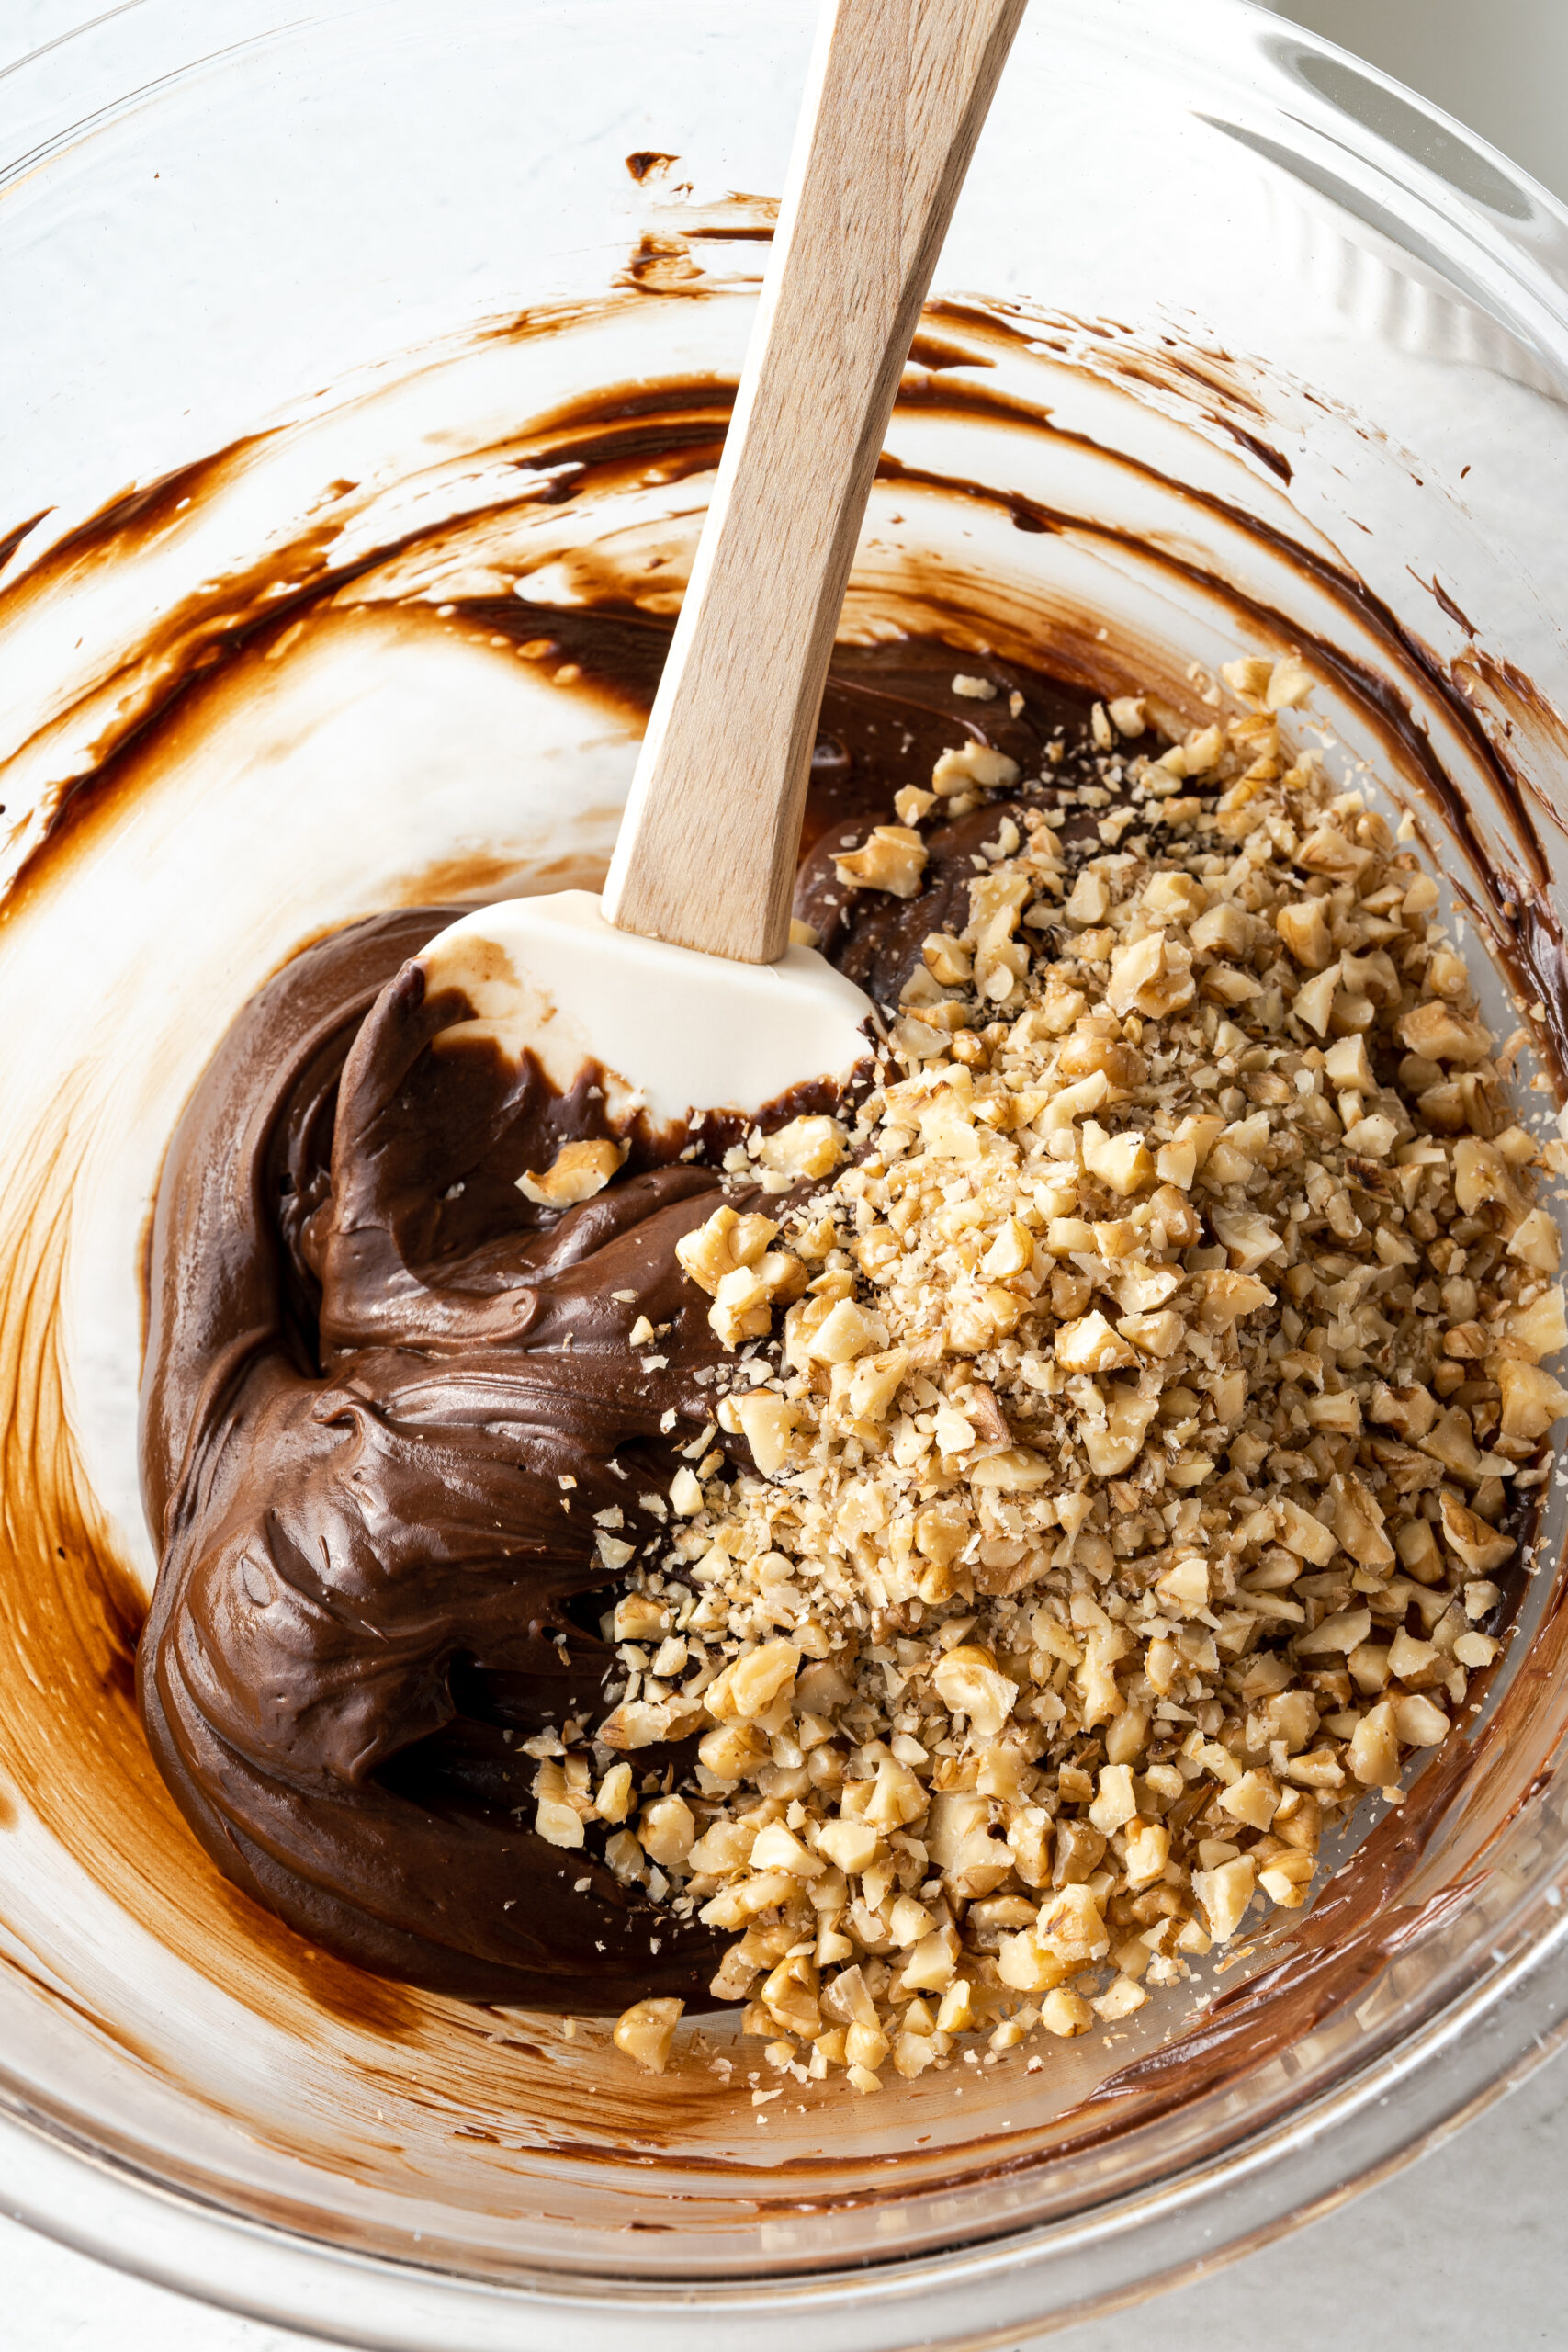 Chocolate mixture and walnuts in a glass mixing bowl.